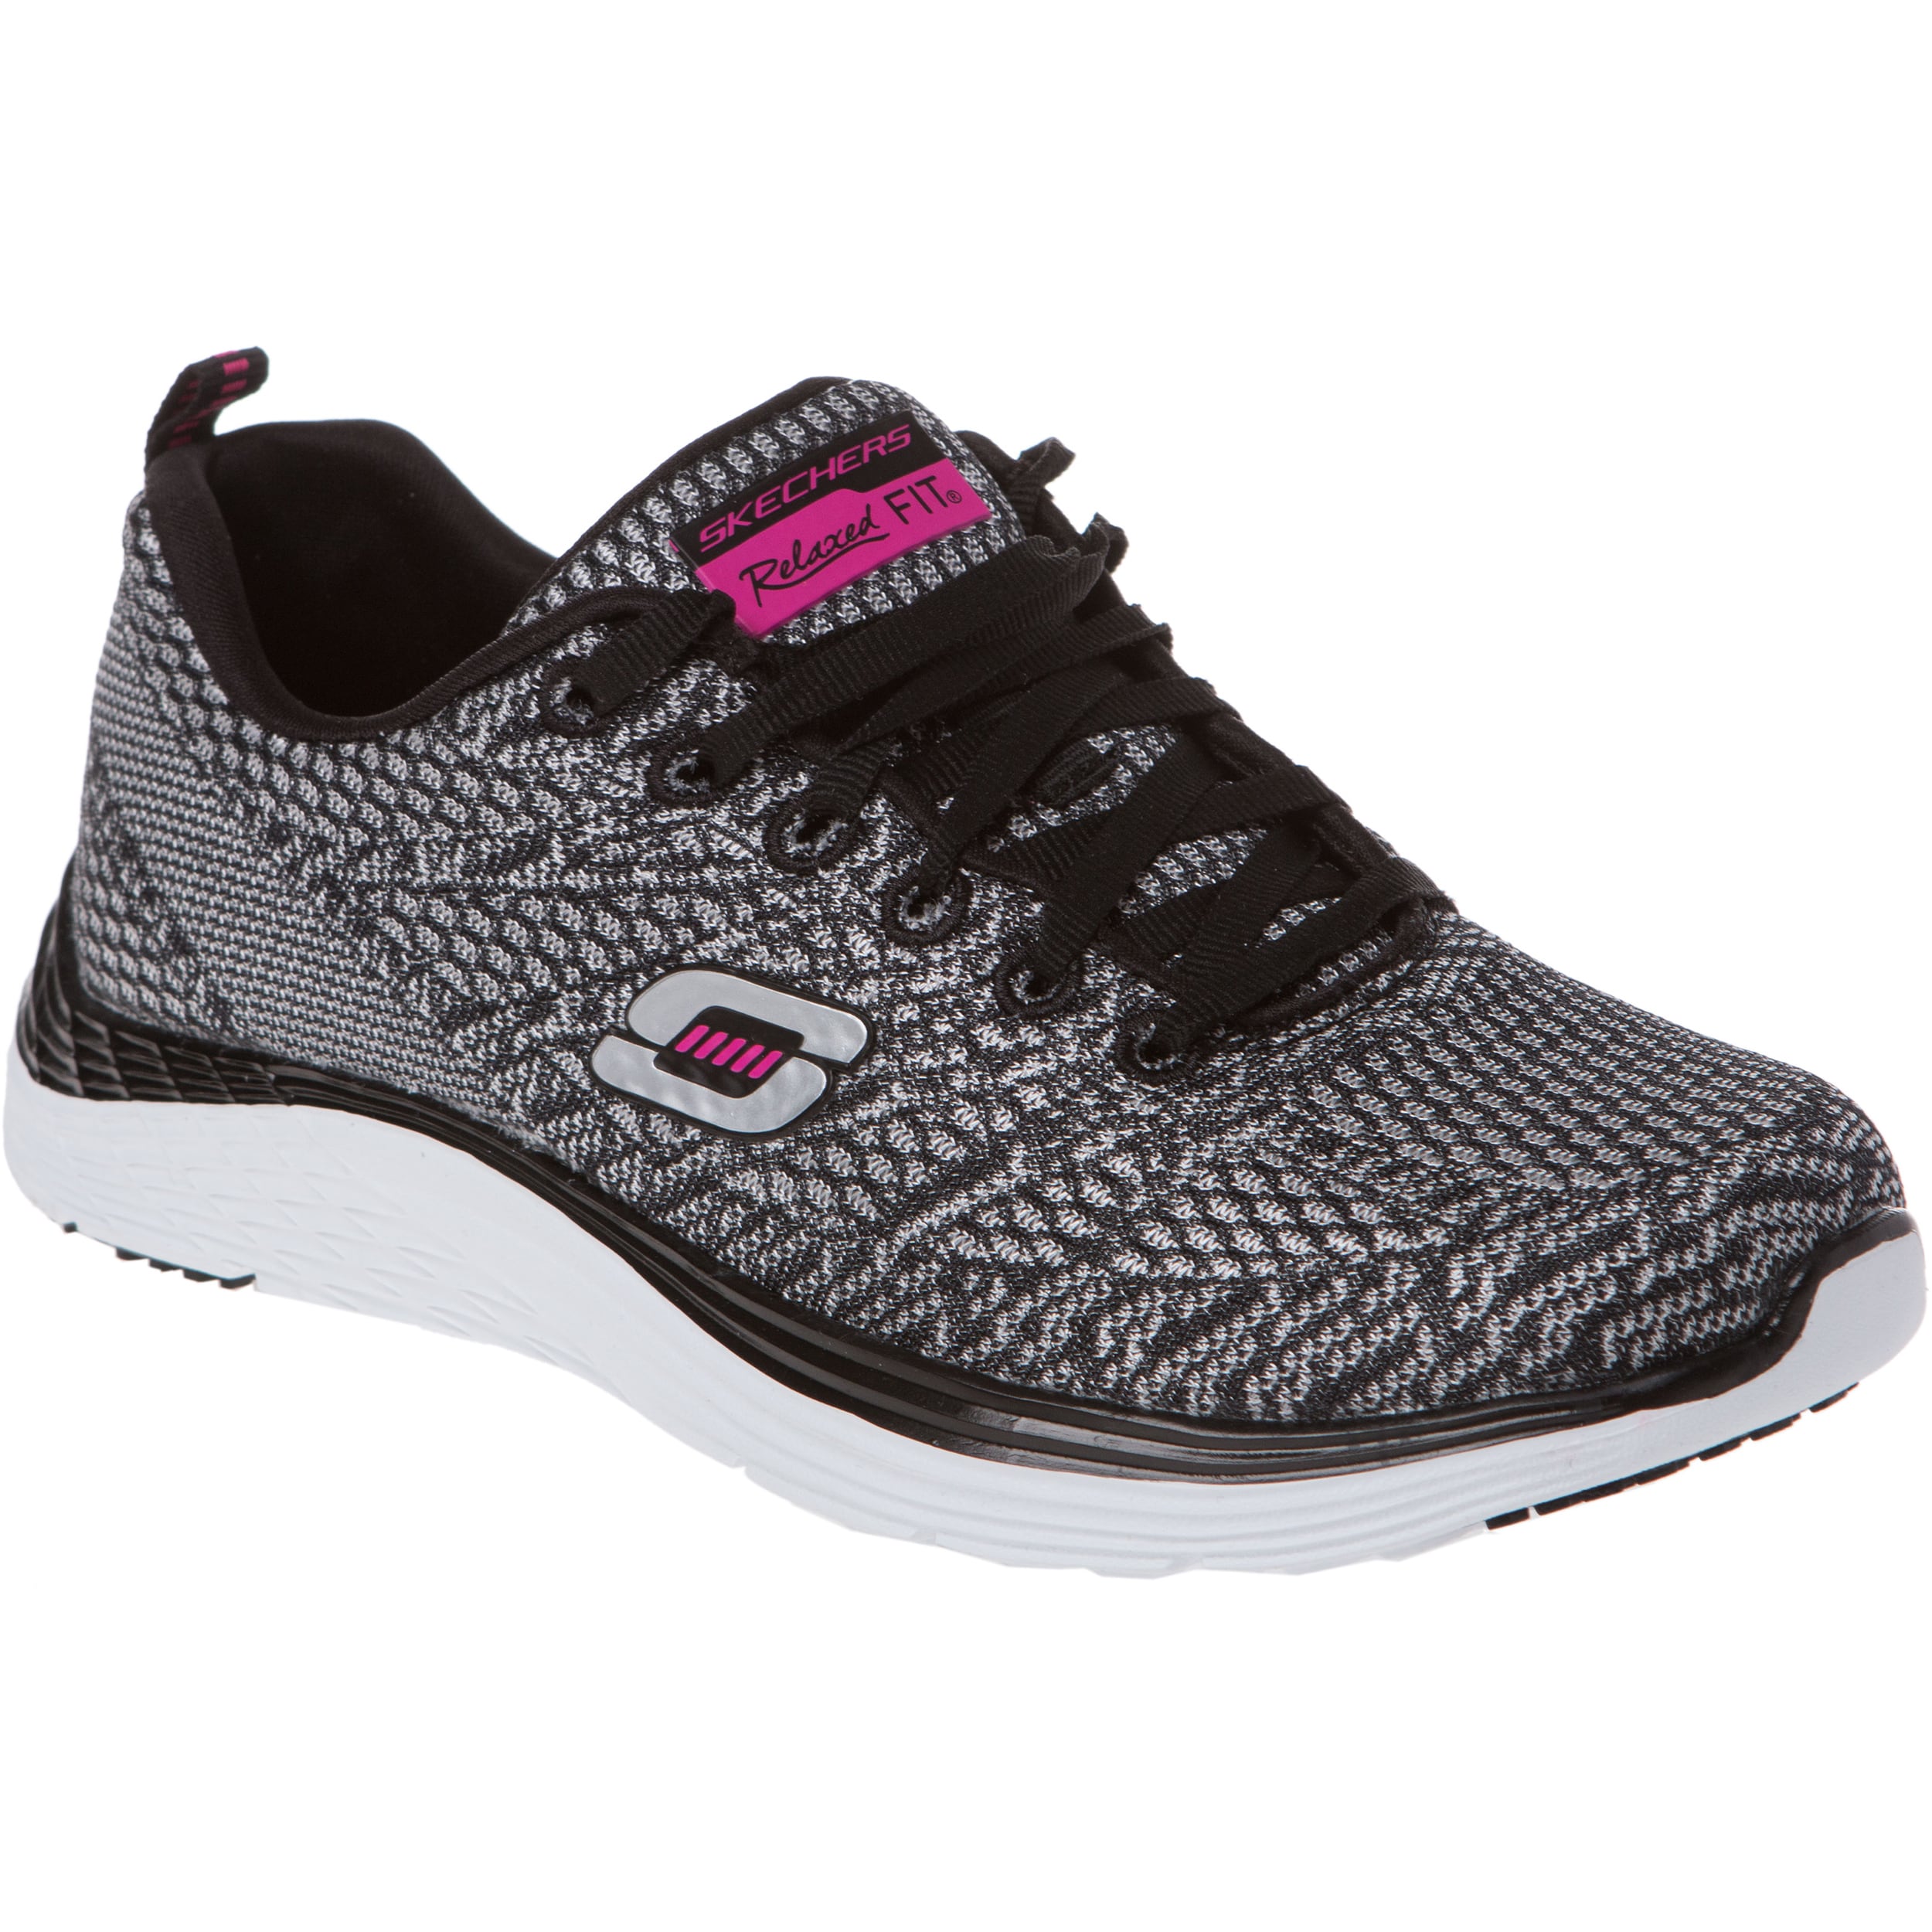 skechers skech knit air cooled